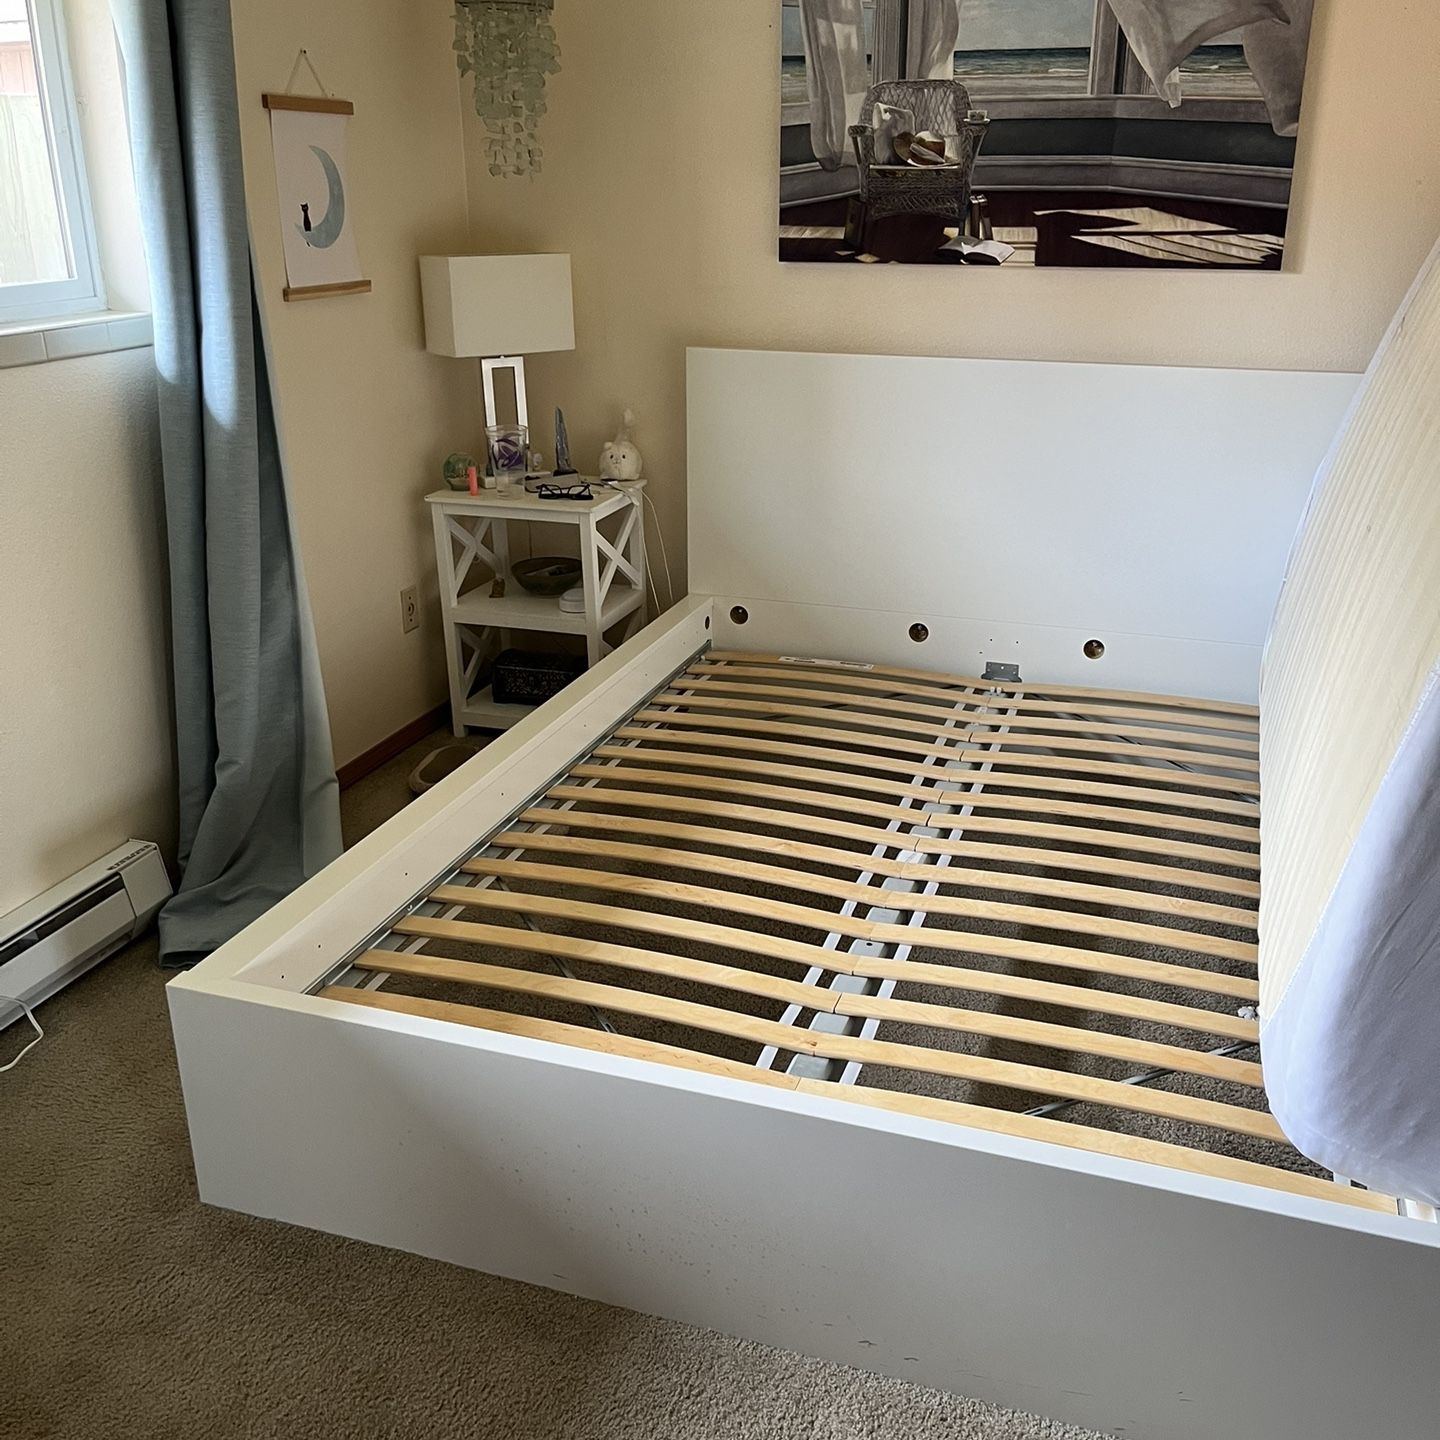 Queen Ikea Malm Bed Frame